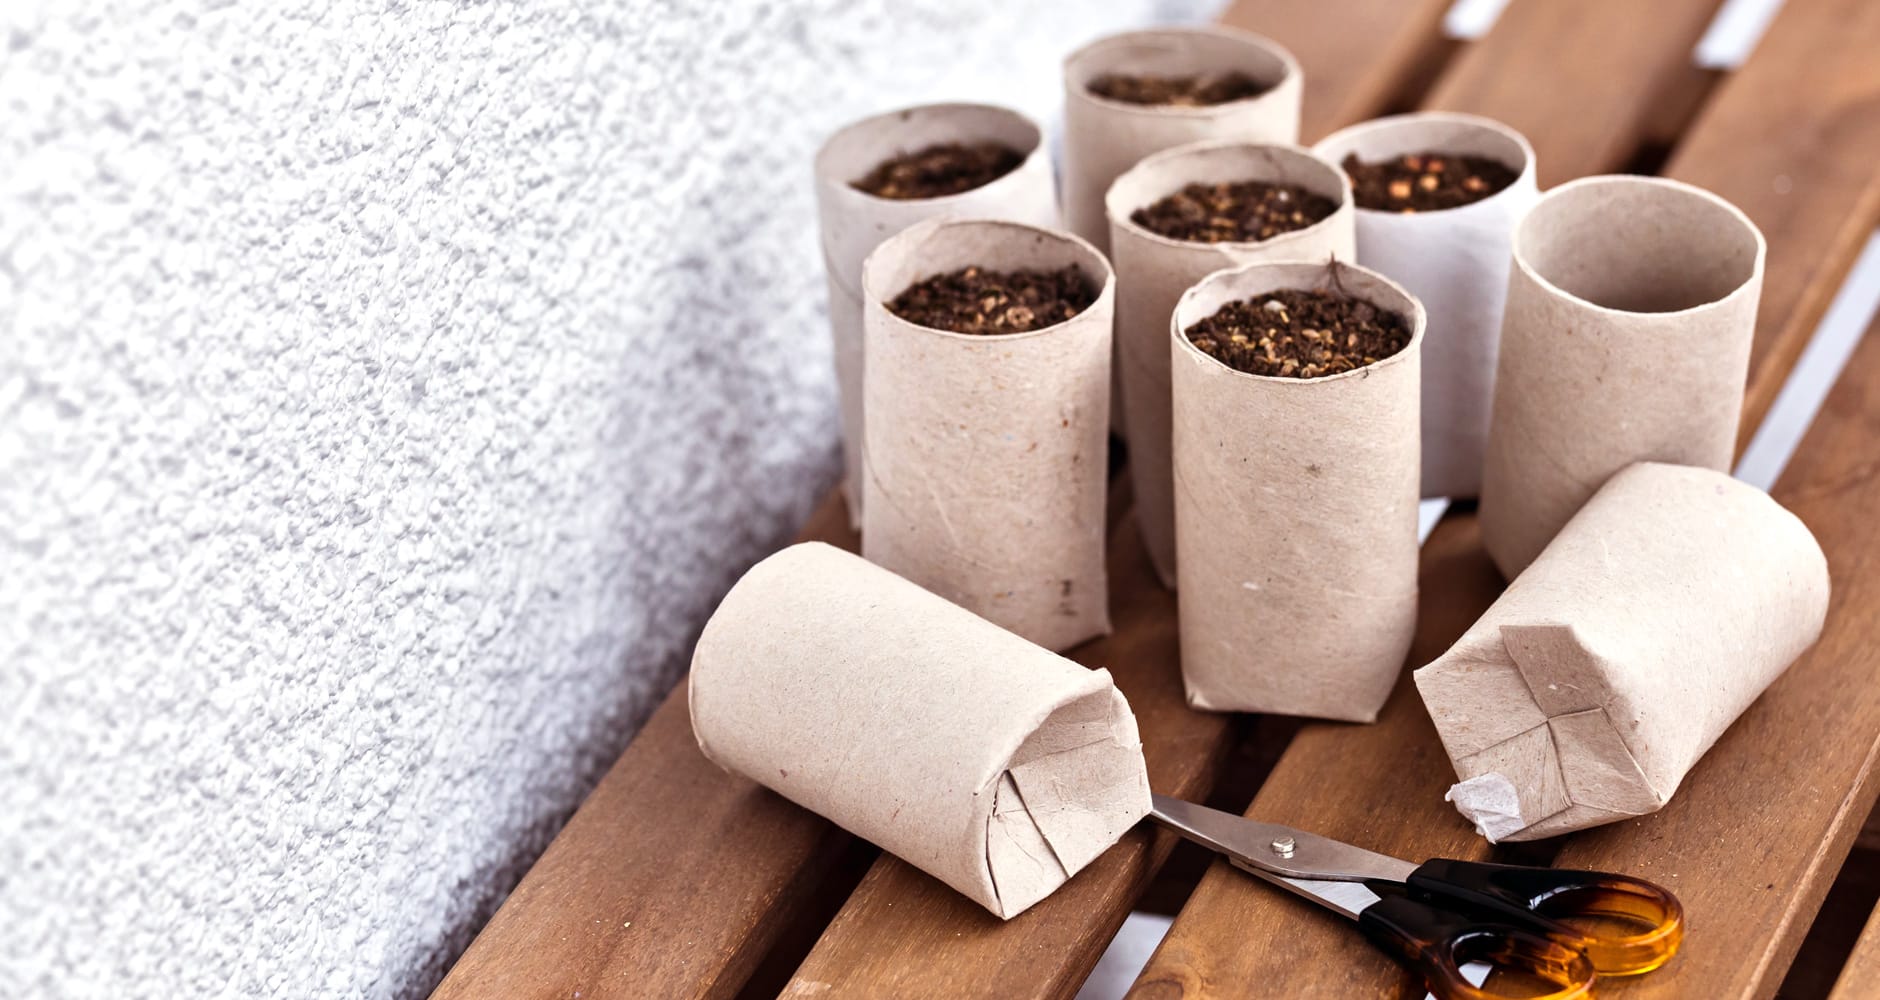 Recycled-Toilet-Paper-Roll-Seed-Starters-A107704384.jpg